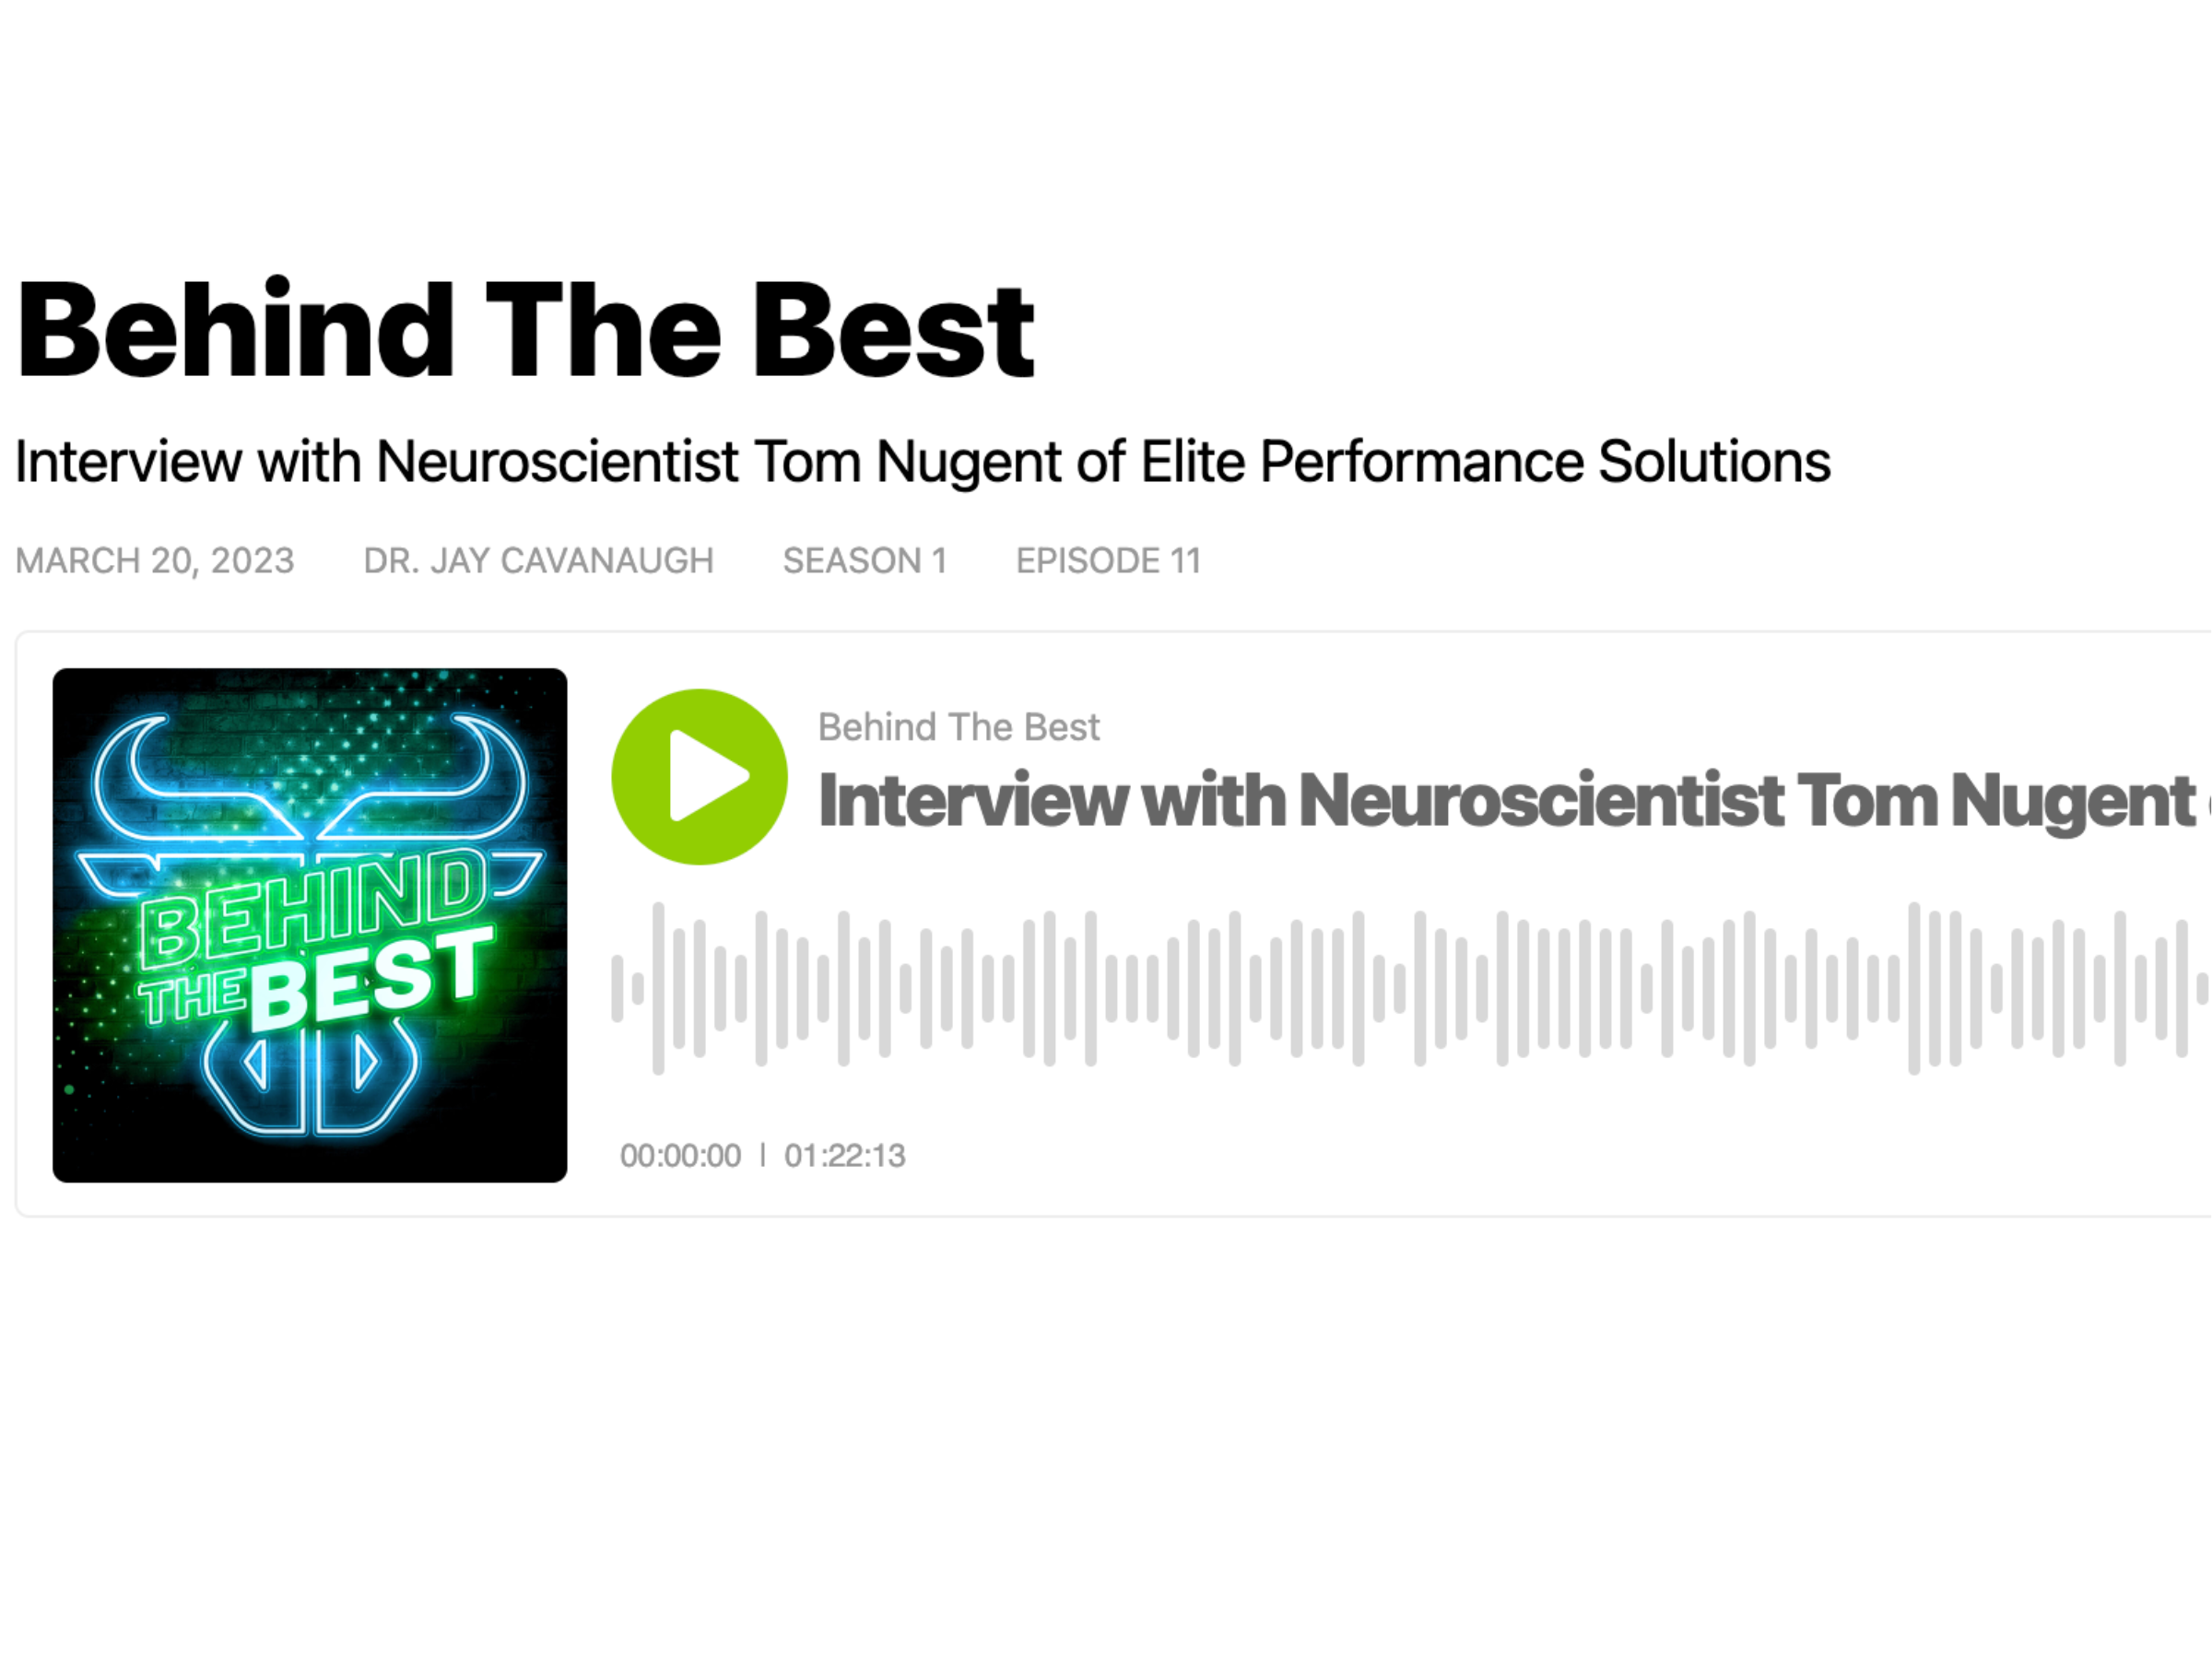 Interview with Neuroscientist Tom Nugent of Elite Performance Solutions